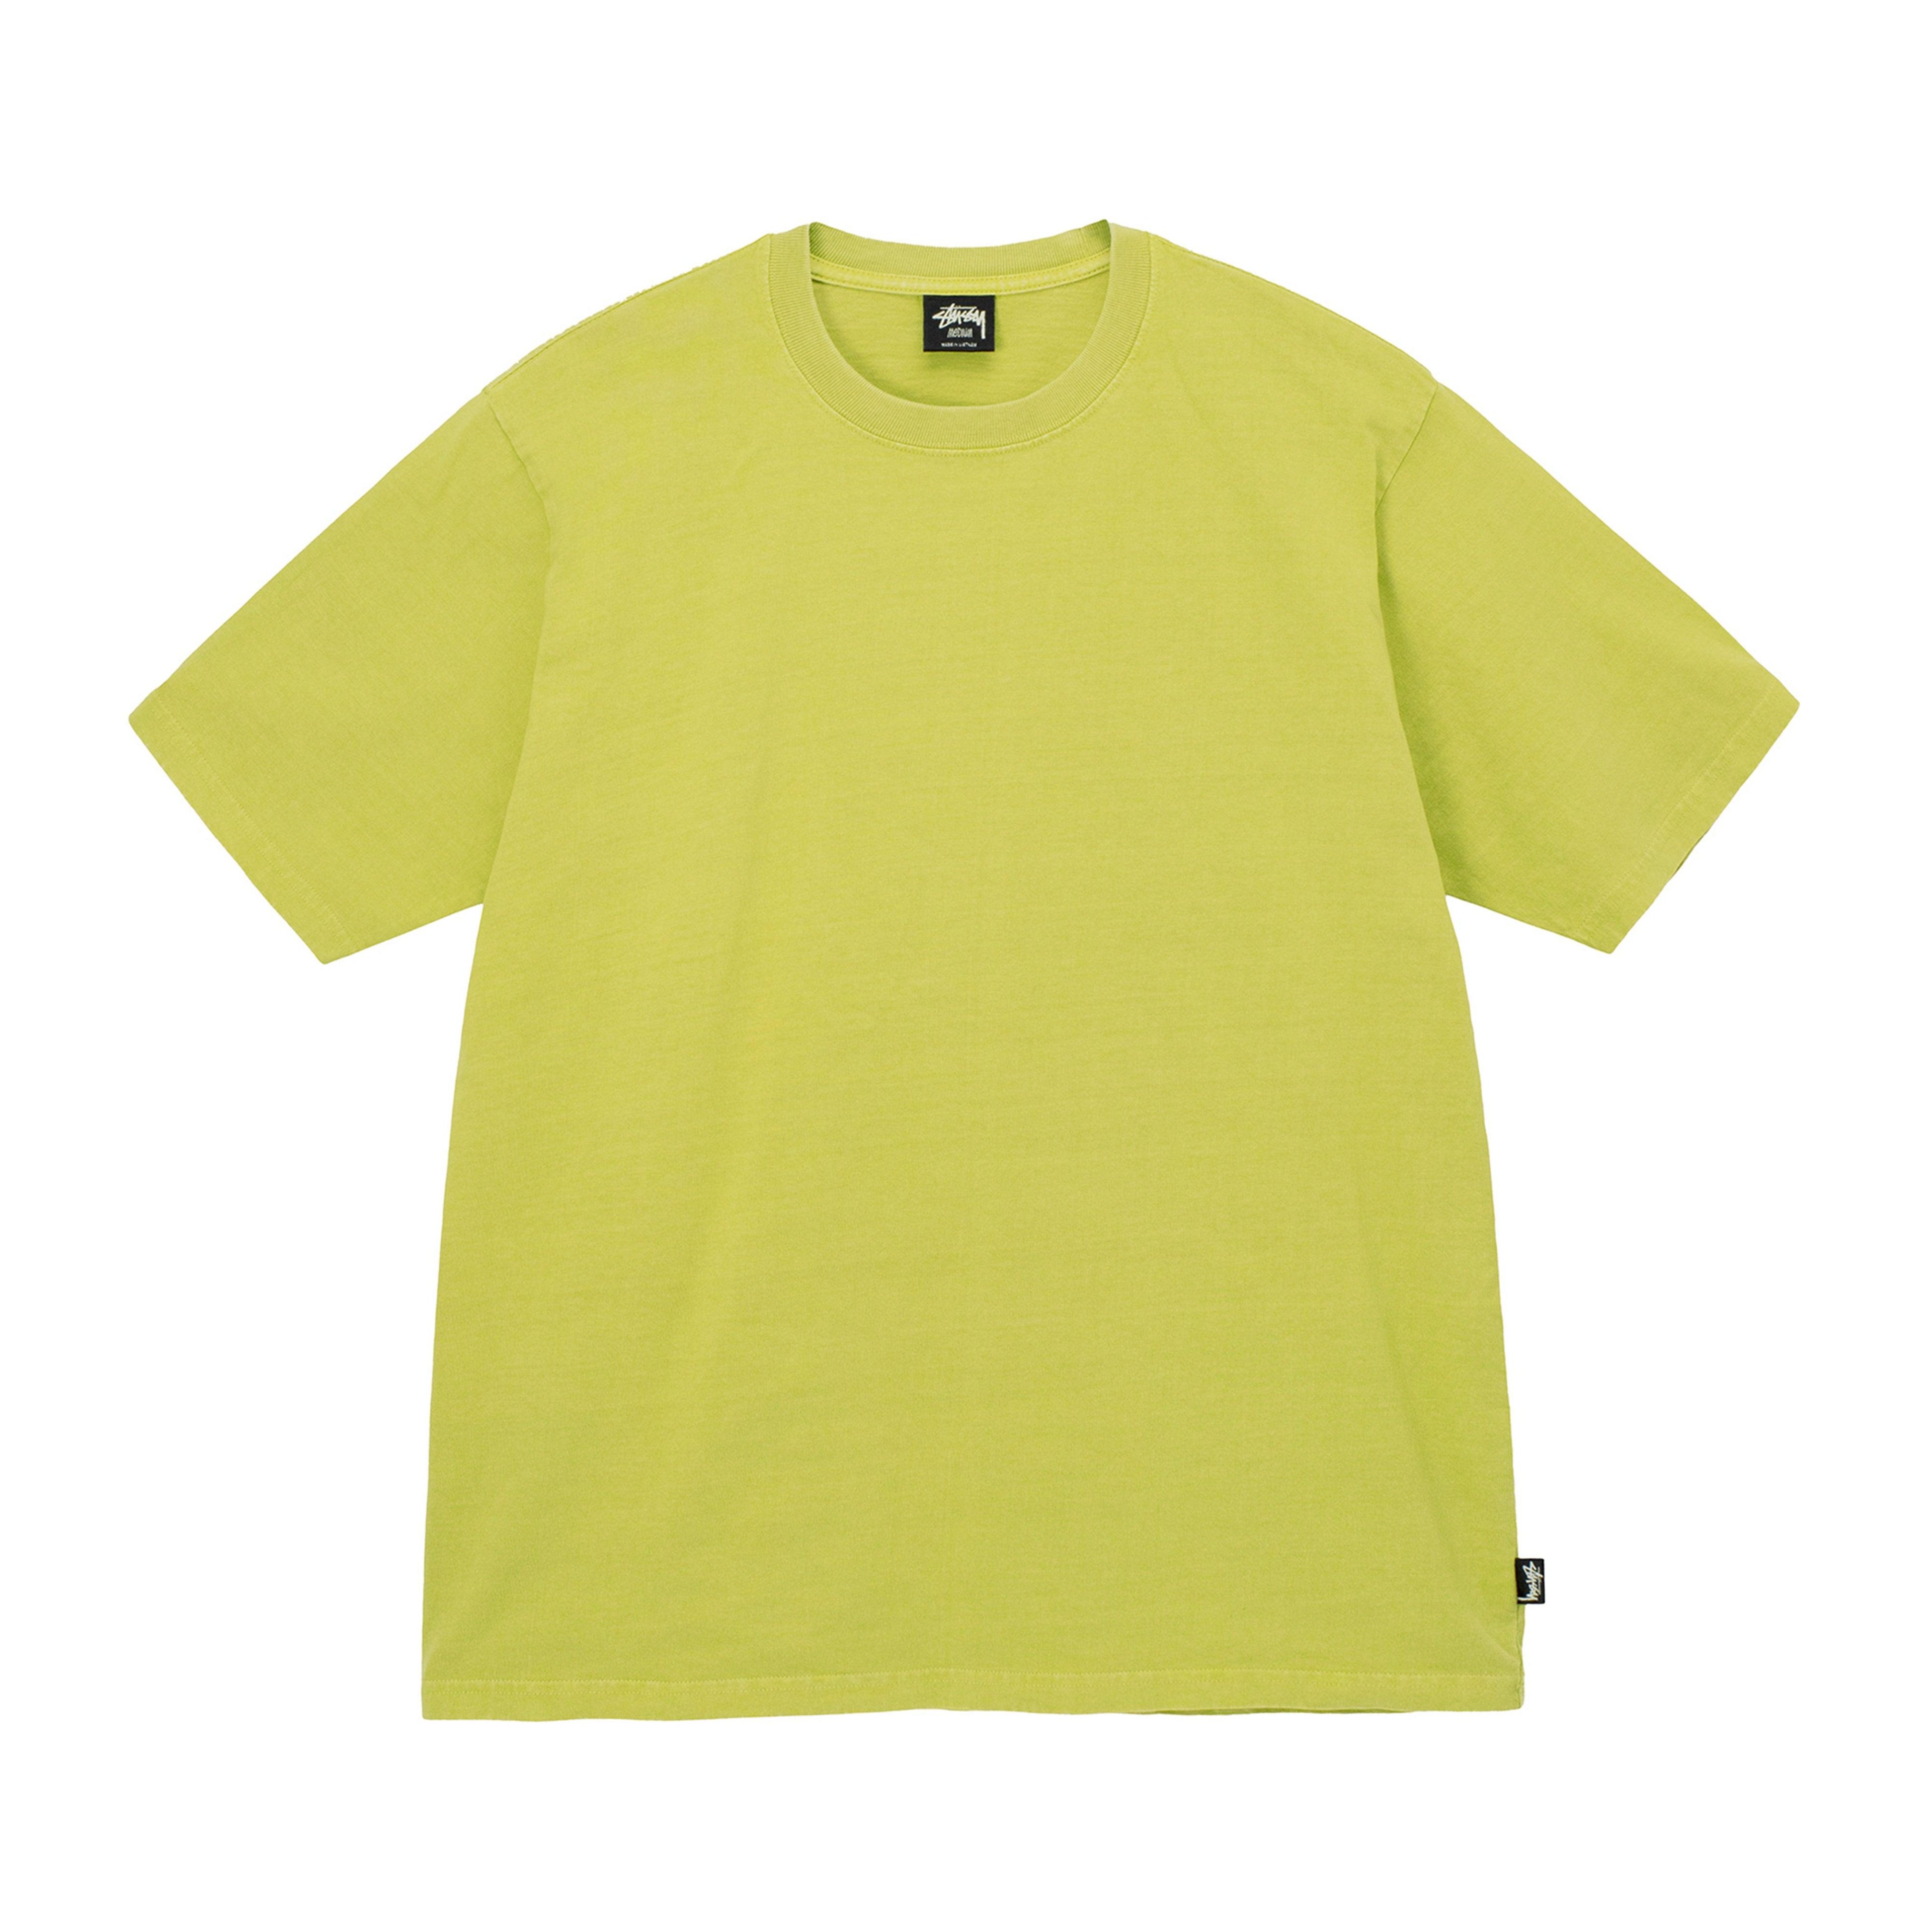 Stüssy - Pigment Dyed Crew - (Yellow) by STUSSY